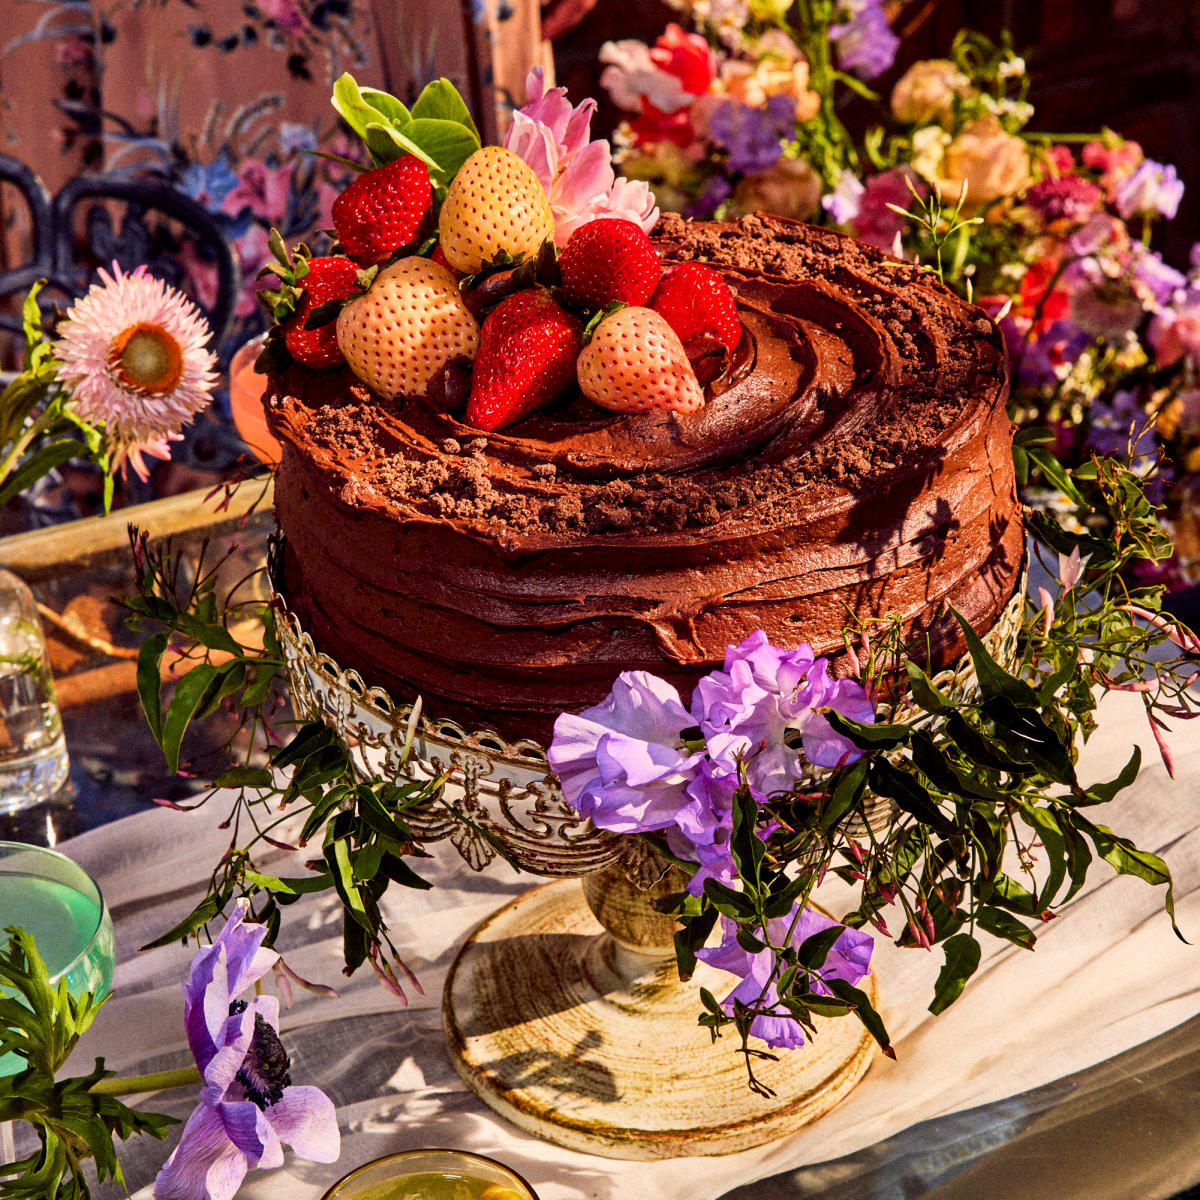 Image of a chocolate cake sitting on a pedestal adorned with colorful fruit and flowers.